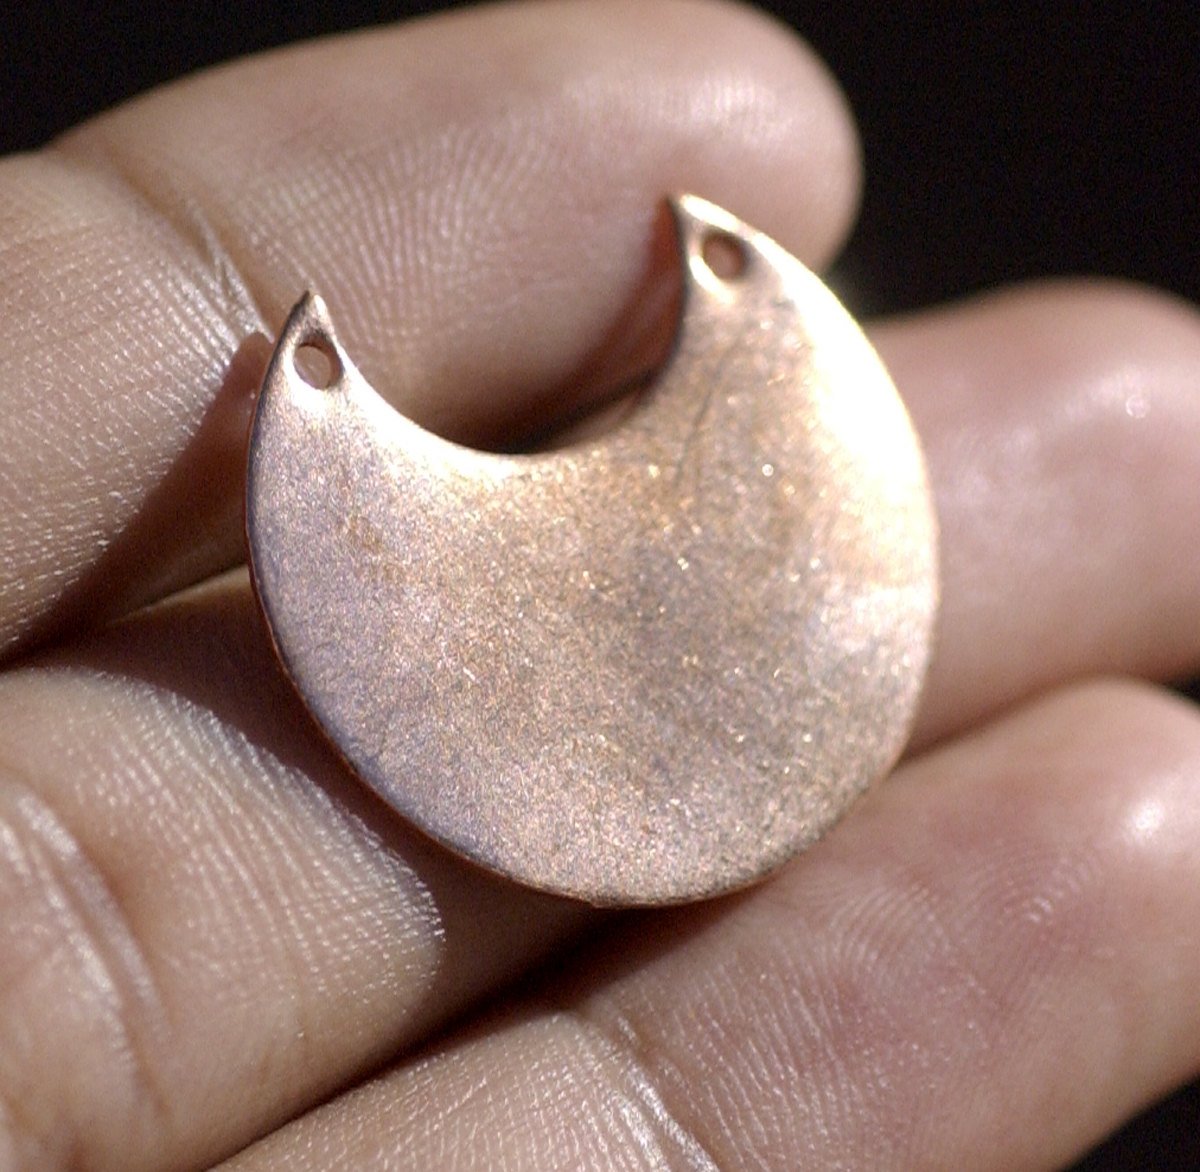 Circle Cutout Earring Piece Blanks Cutout for Enameling Stamping Texturing  4 pieces